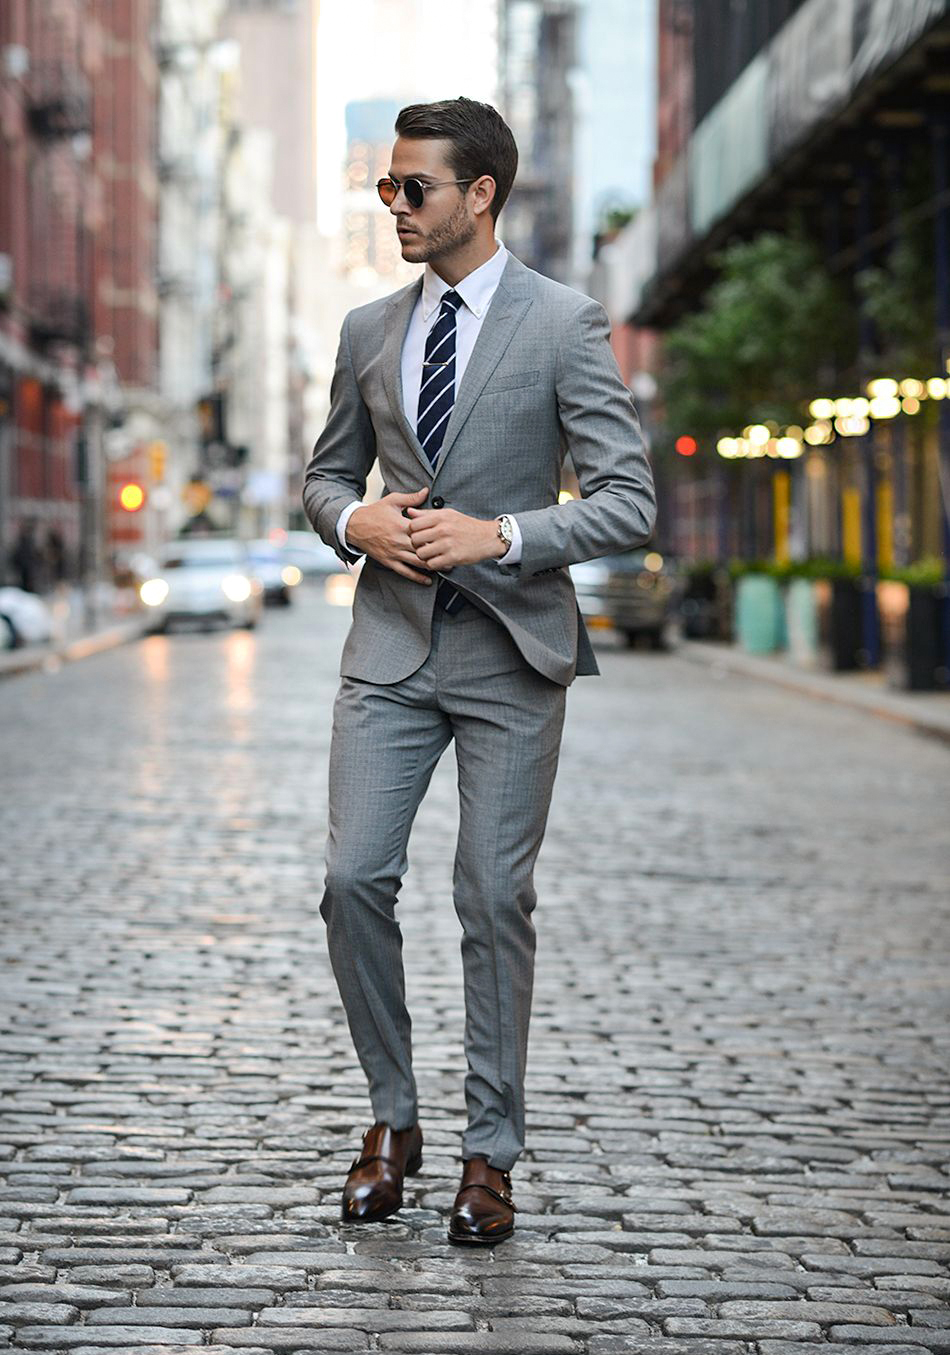 Light grey suit and white shirt color combination